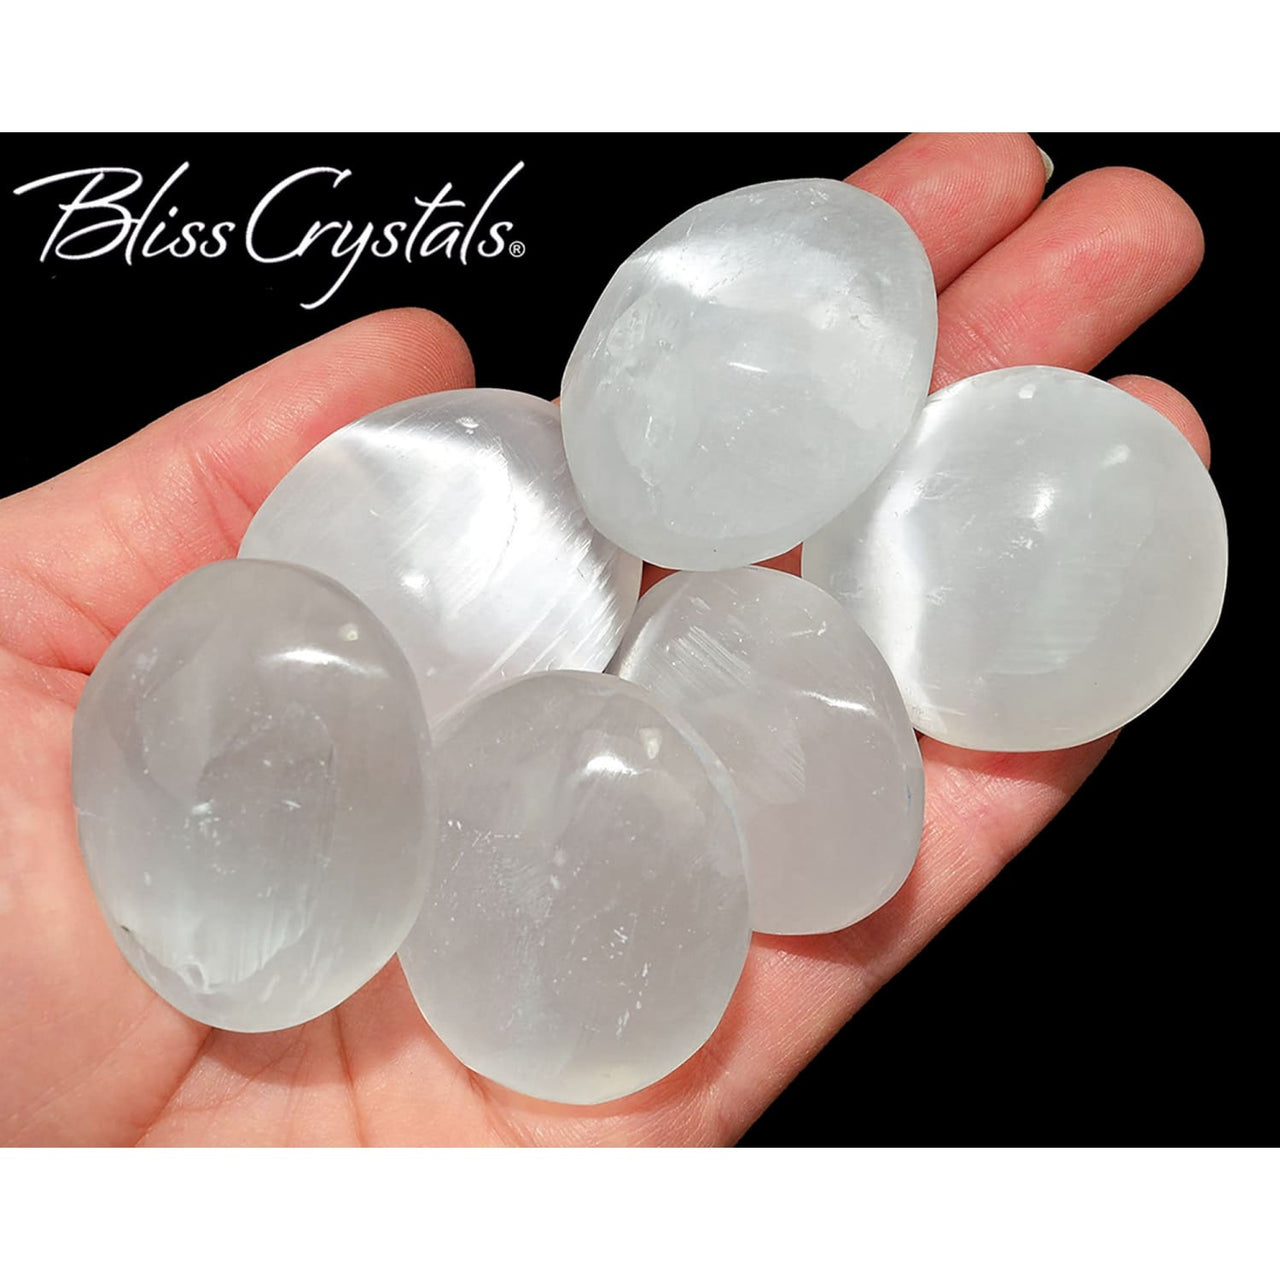 1 SELENITE XS Palm Stone Moonglow Emotional Cleanser Yoga 